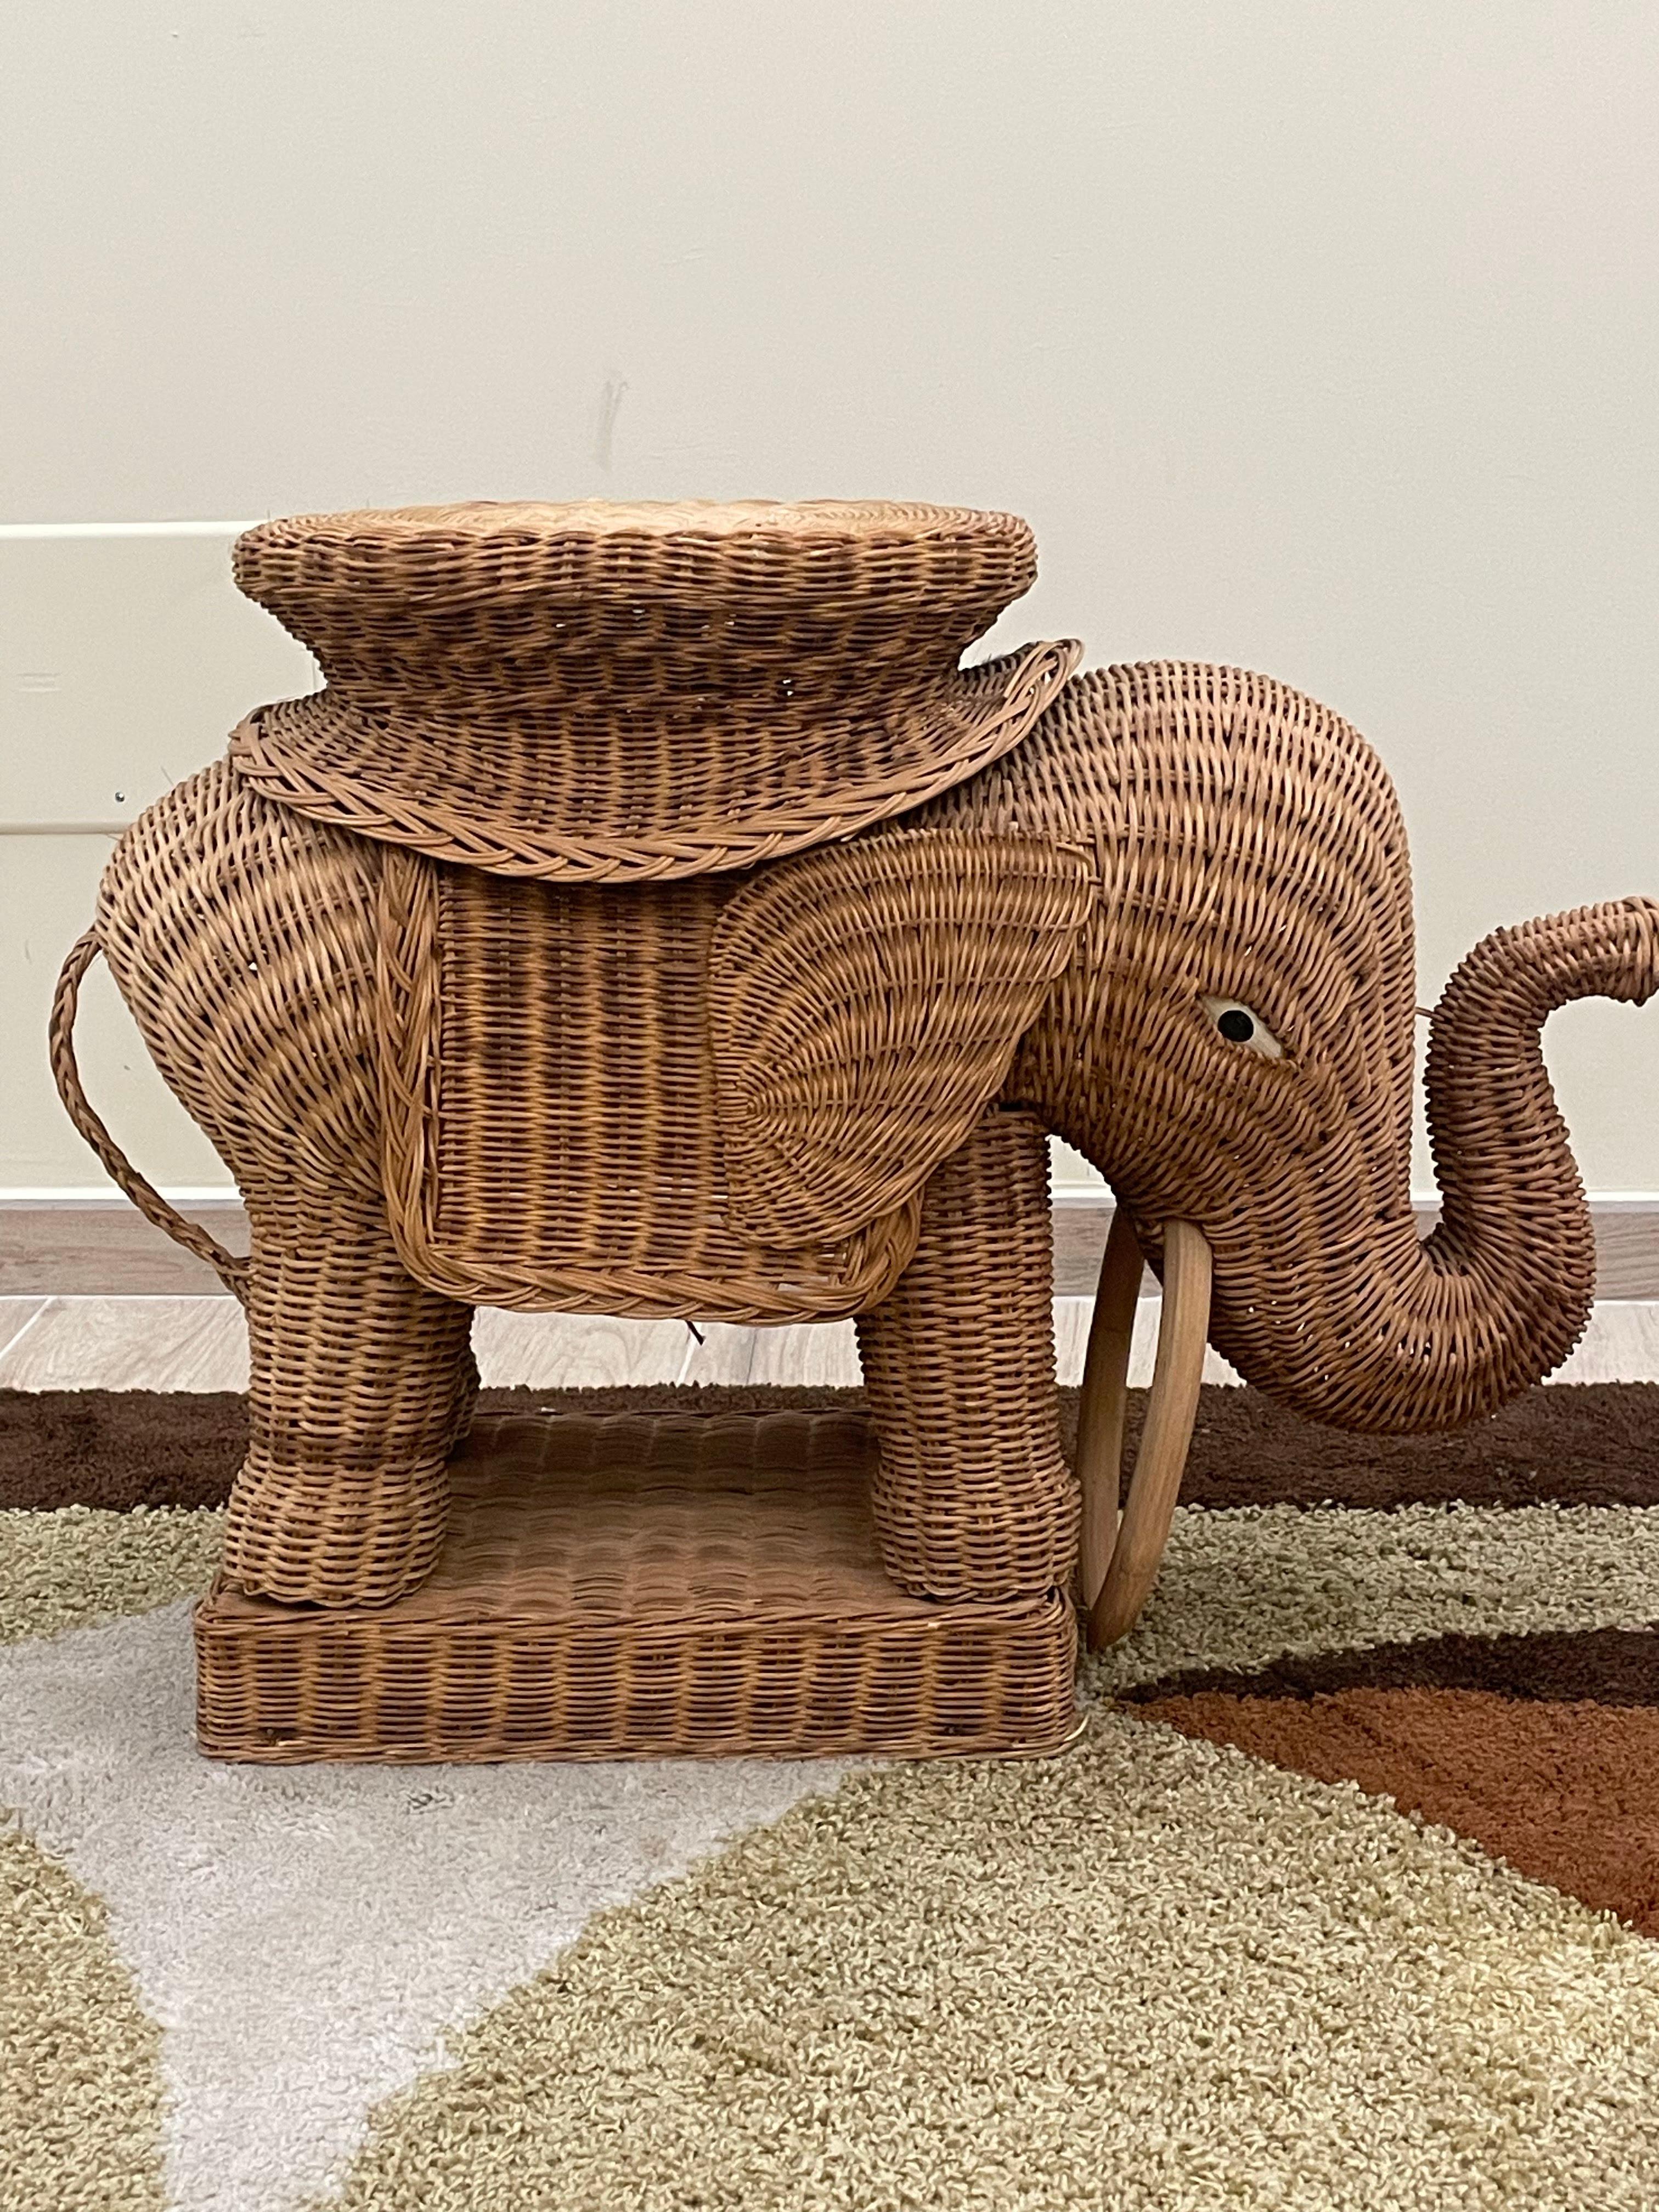 Elephant-shaped coffee table made of wicker and dating from the 1960s.

A decor that is always in fashion and perfect in all environments, in addition, the elephant is also rich in symbolism, and ensuring it also has a place where it can turn toward